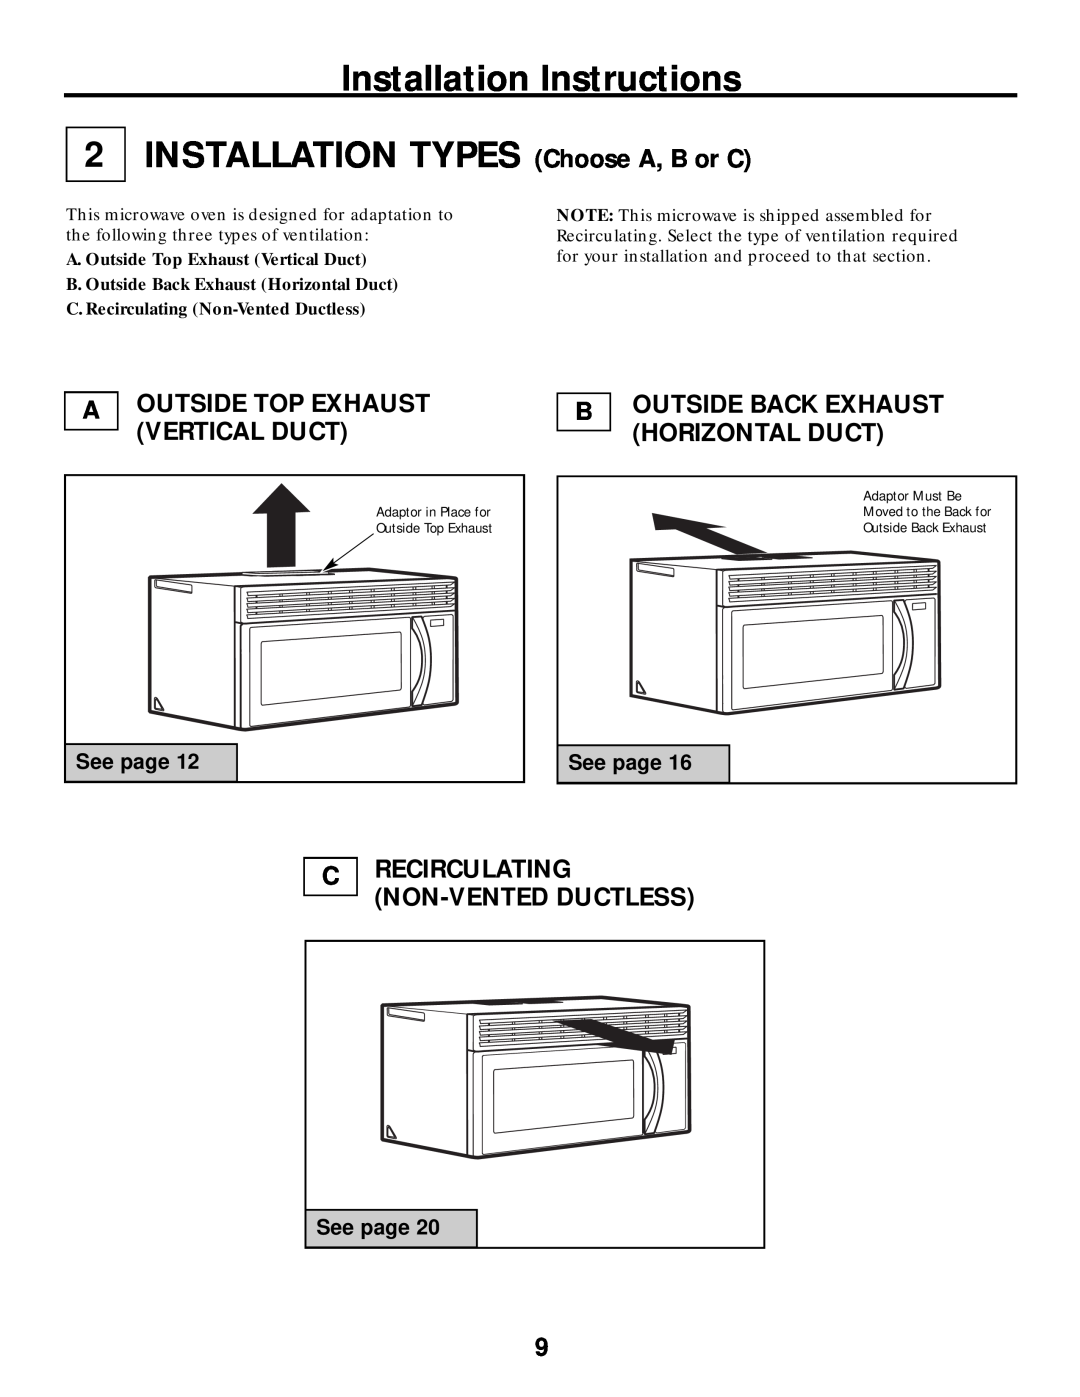 Frigidaire 316495064 warranty INSTALLATION TYPES Choose A, B or C, Aoutside Top Exhaust Vertical Duct, See page 